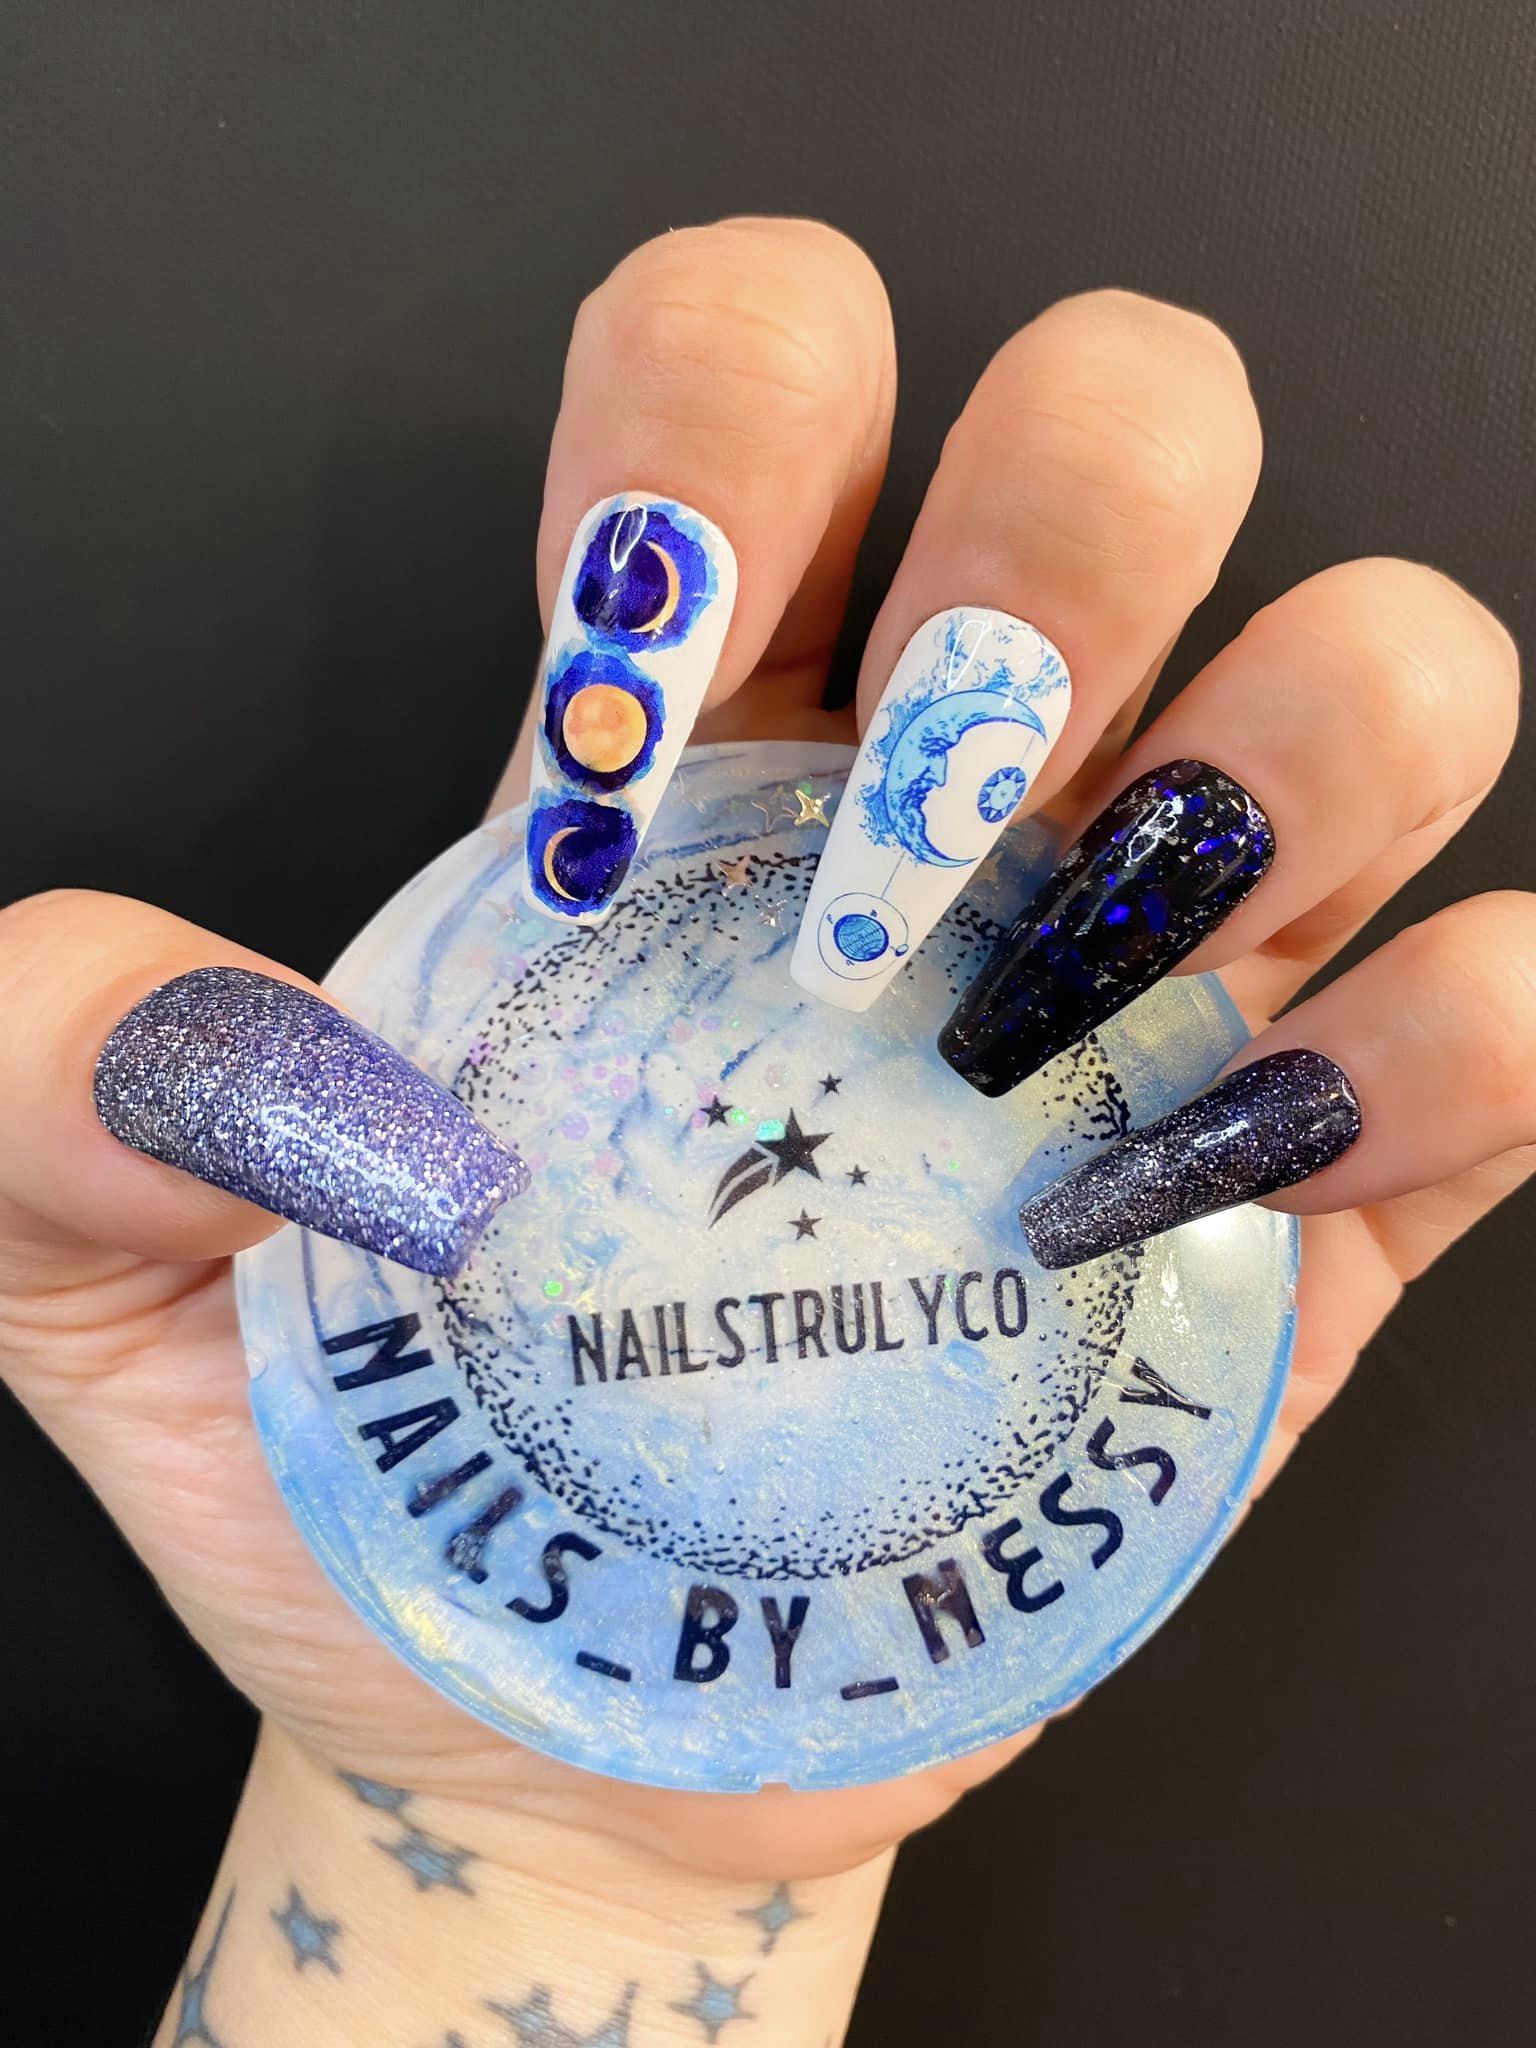 Celestial Nail Art: 27+ Stunning Designs for Your Next Manicure